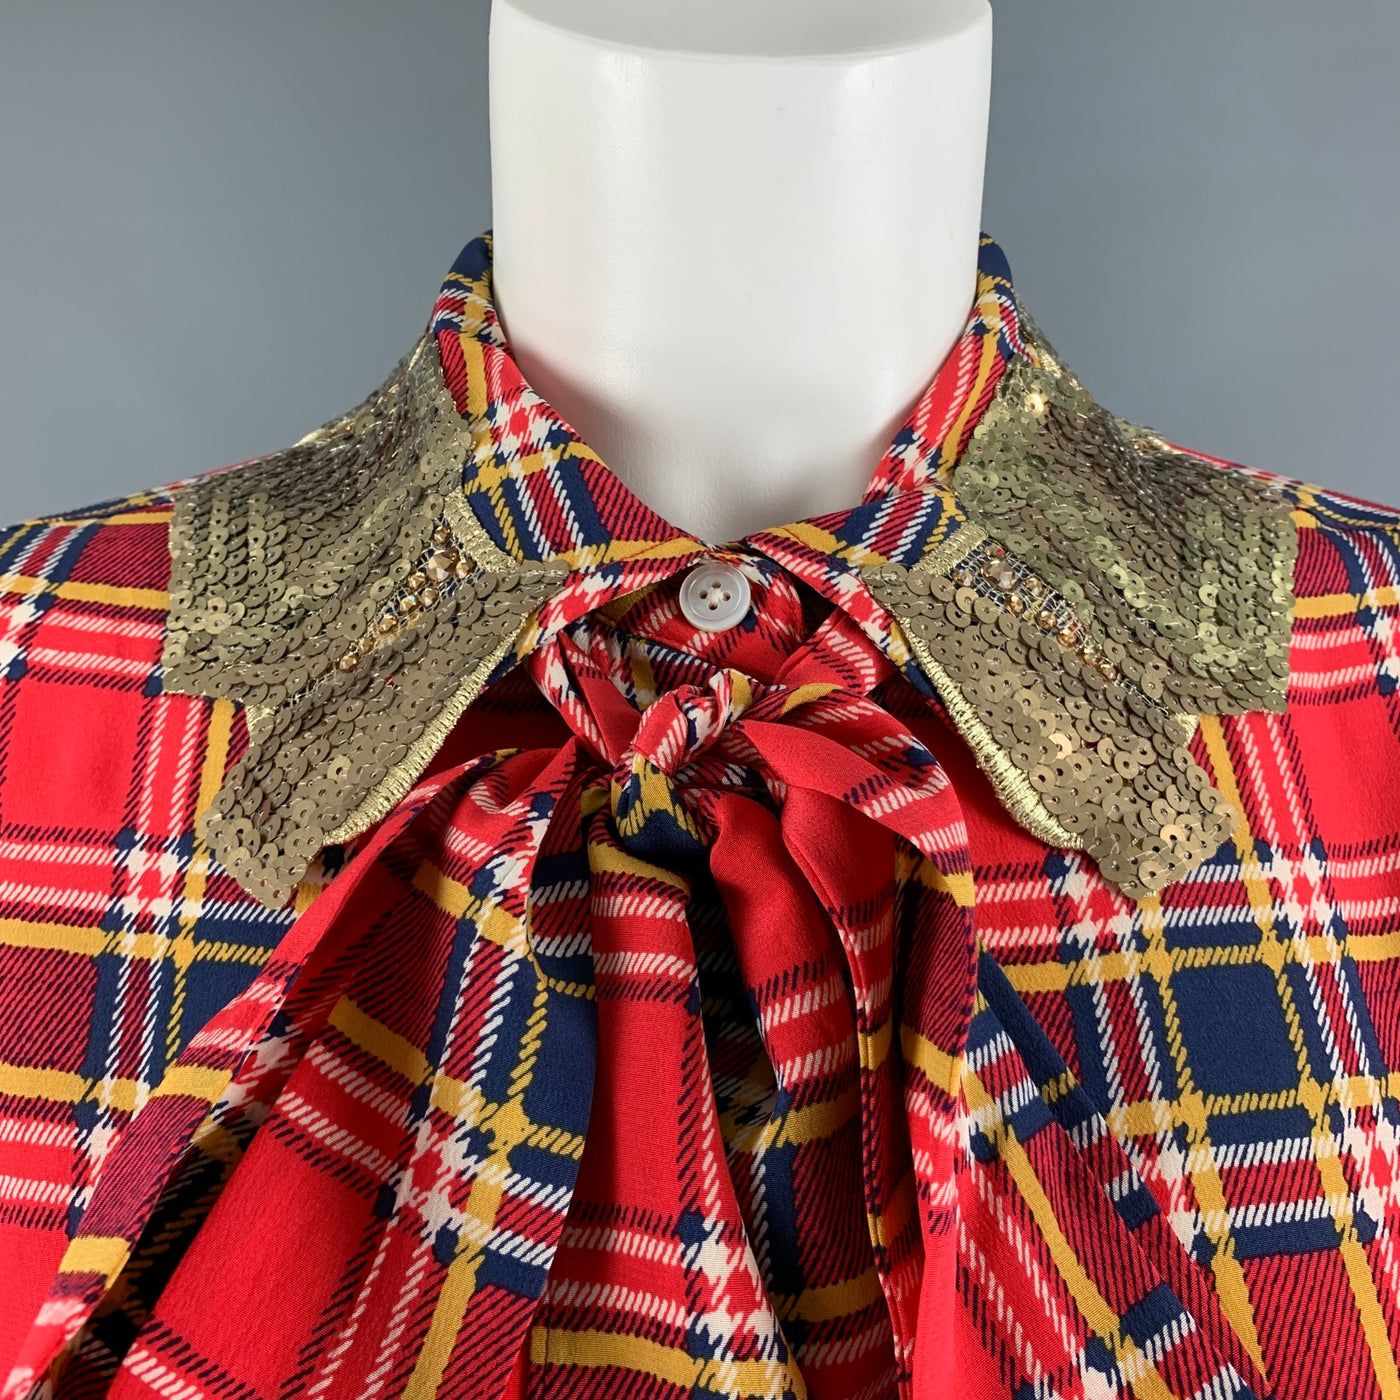 MARC JACOBS Size 8 Red Yellow/Blue Silk Plaid Long Shirt